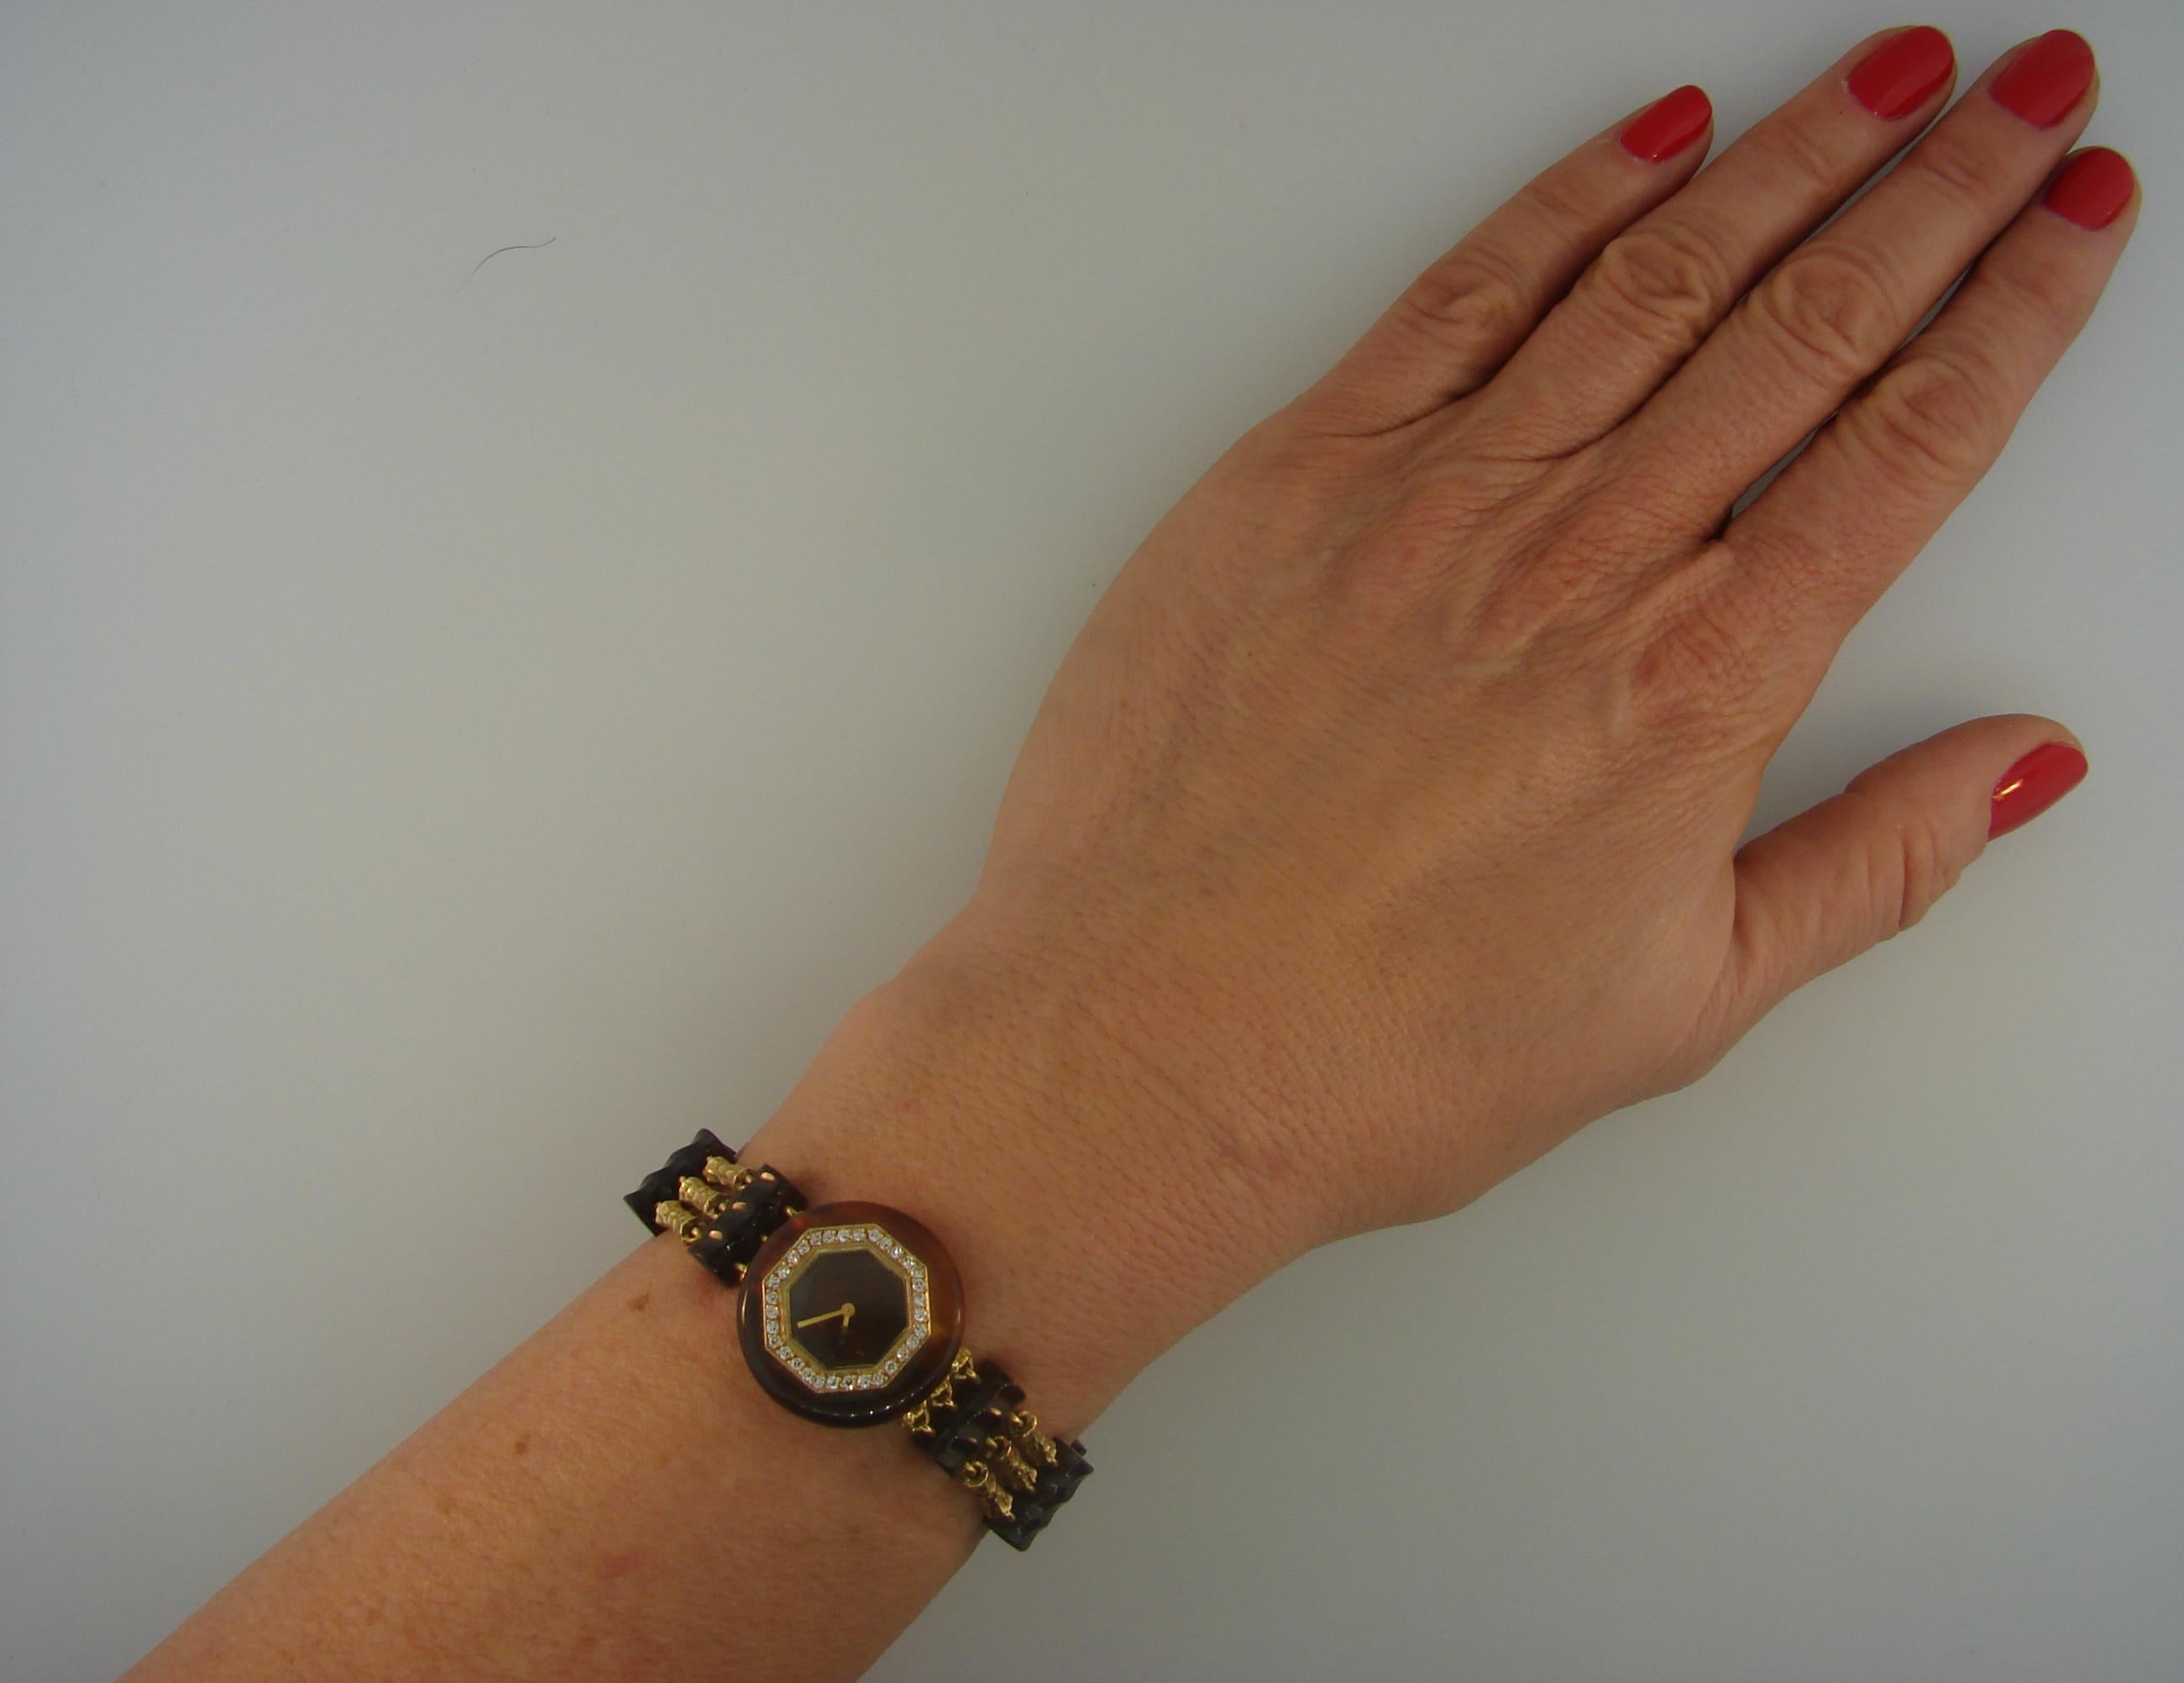 Beautiful feminine watch created by Boucheron in the 1970s. Tasteful combination of brown Bakelite, yellow gold and white diamonds. Perfect proportions to this lovely vintage timepiece.

The dial is slightly under 1